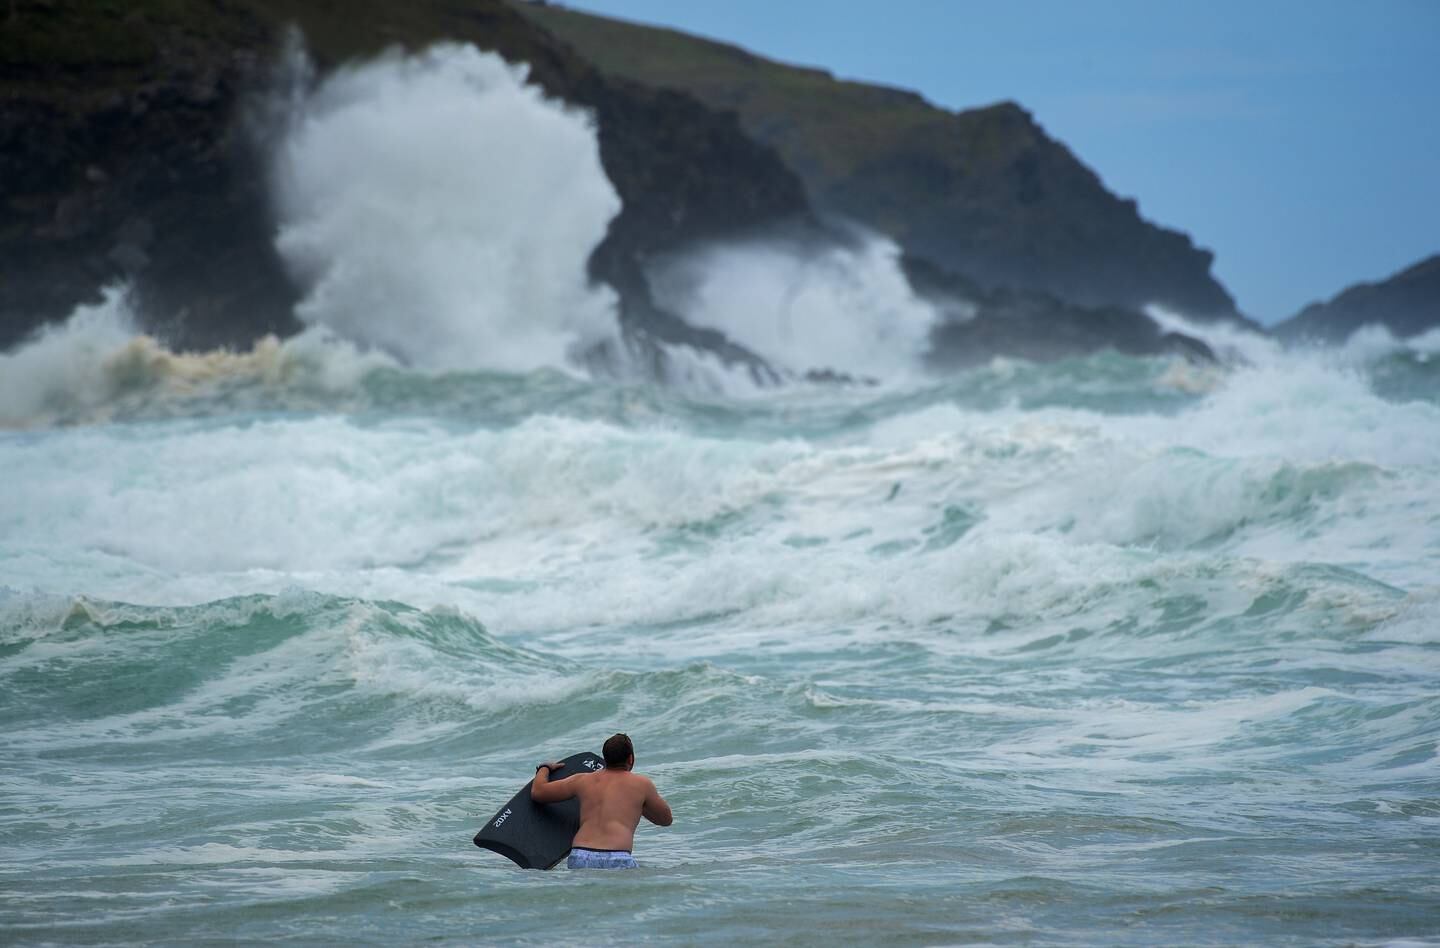 Bodyboarders brave the waves in rough seas in Newquay during Storm Evert earlier this year. Getty Images